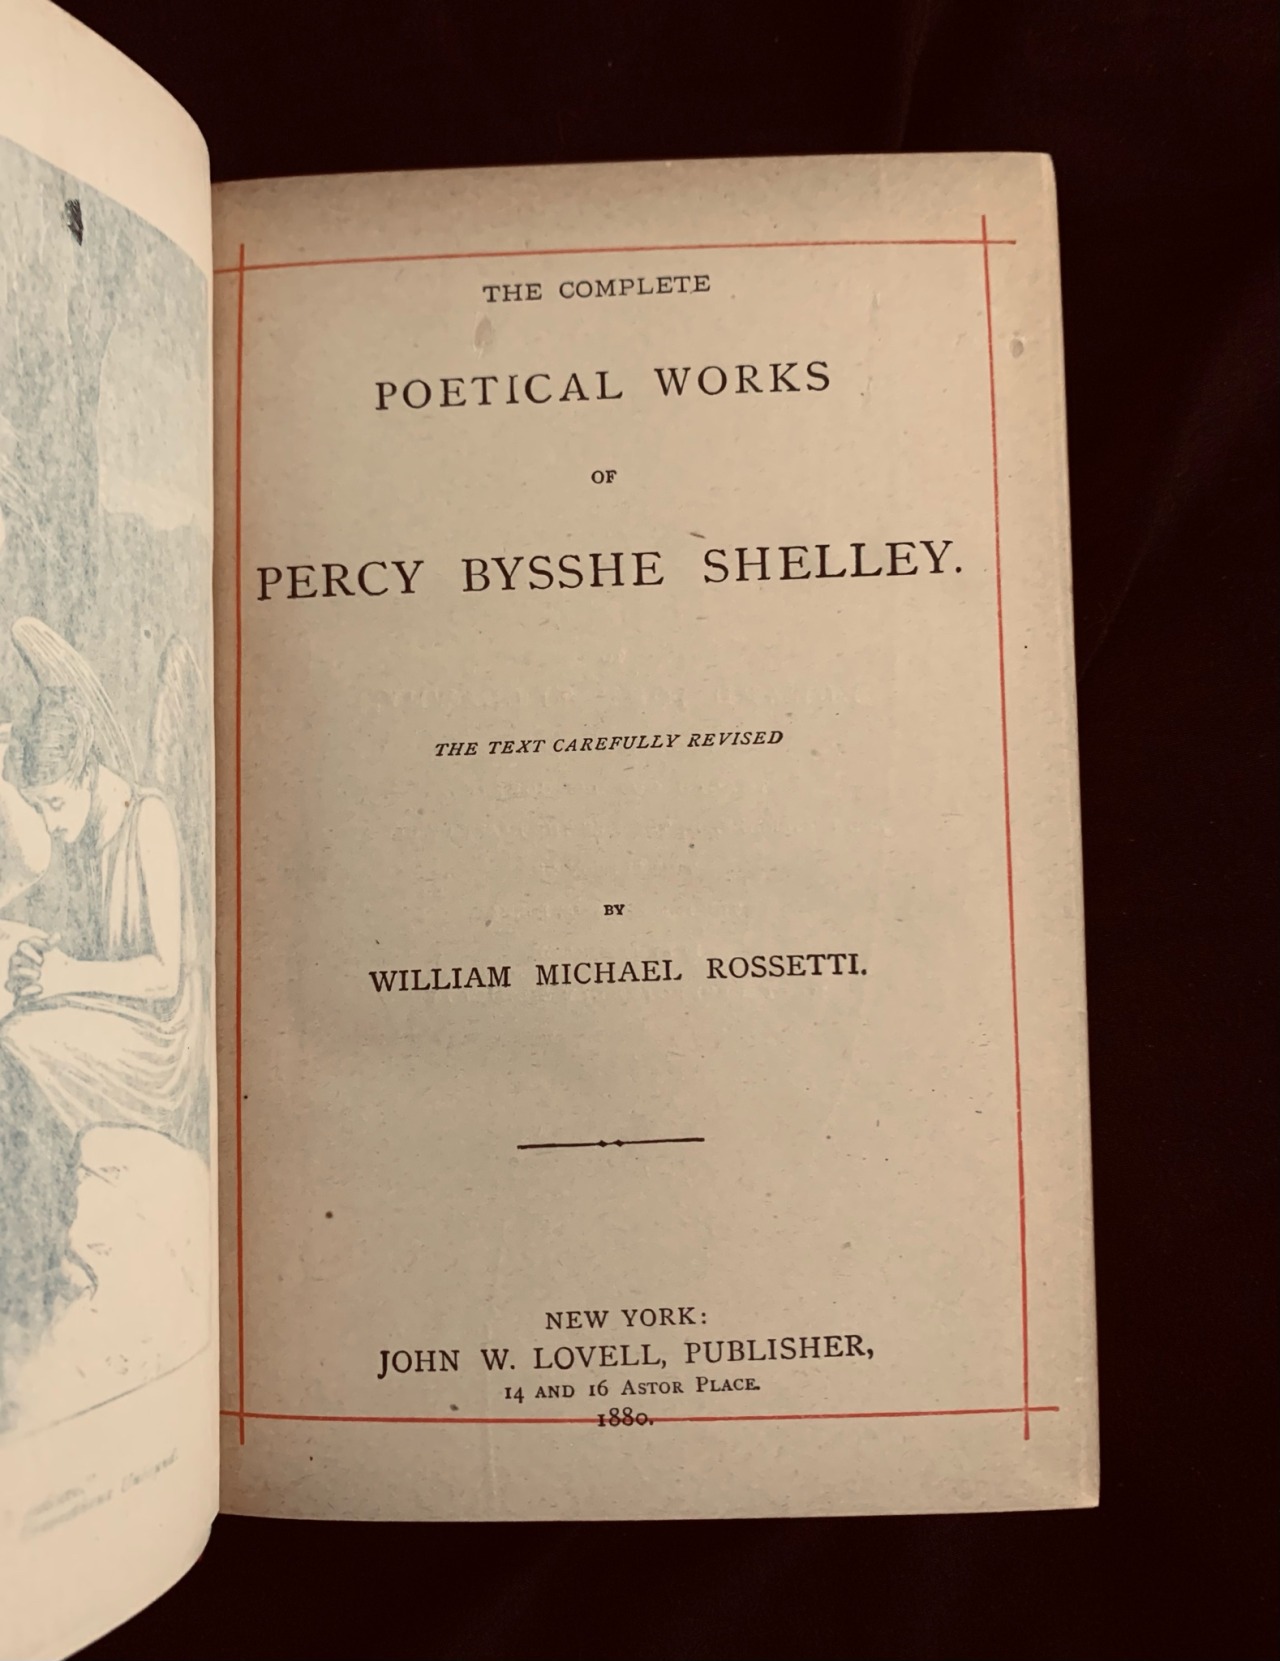 #percy shelley on Tumblr